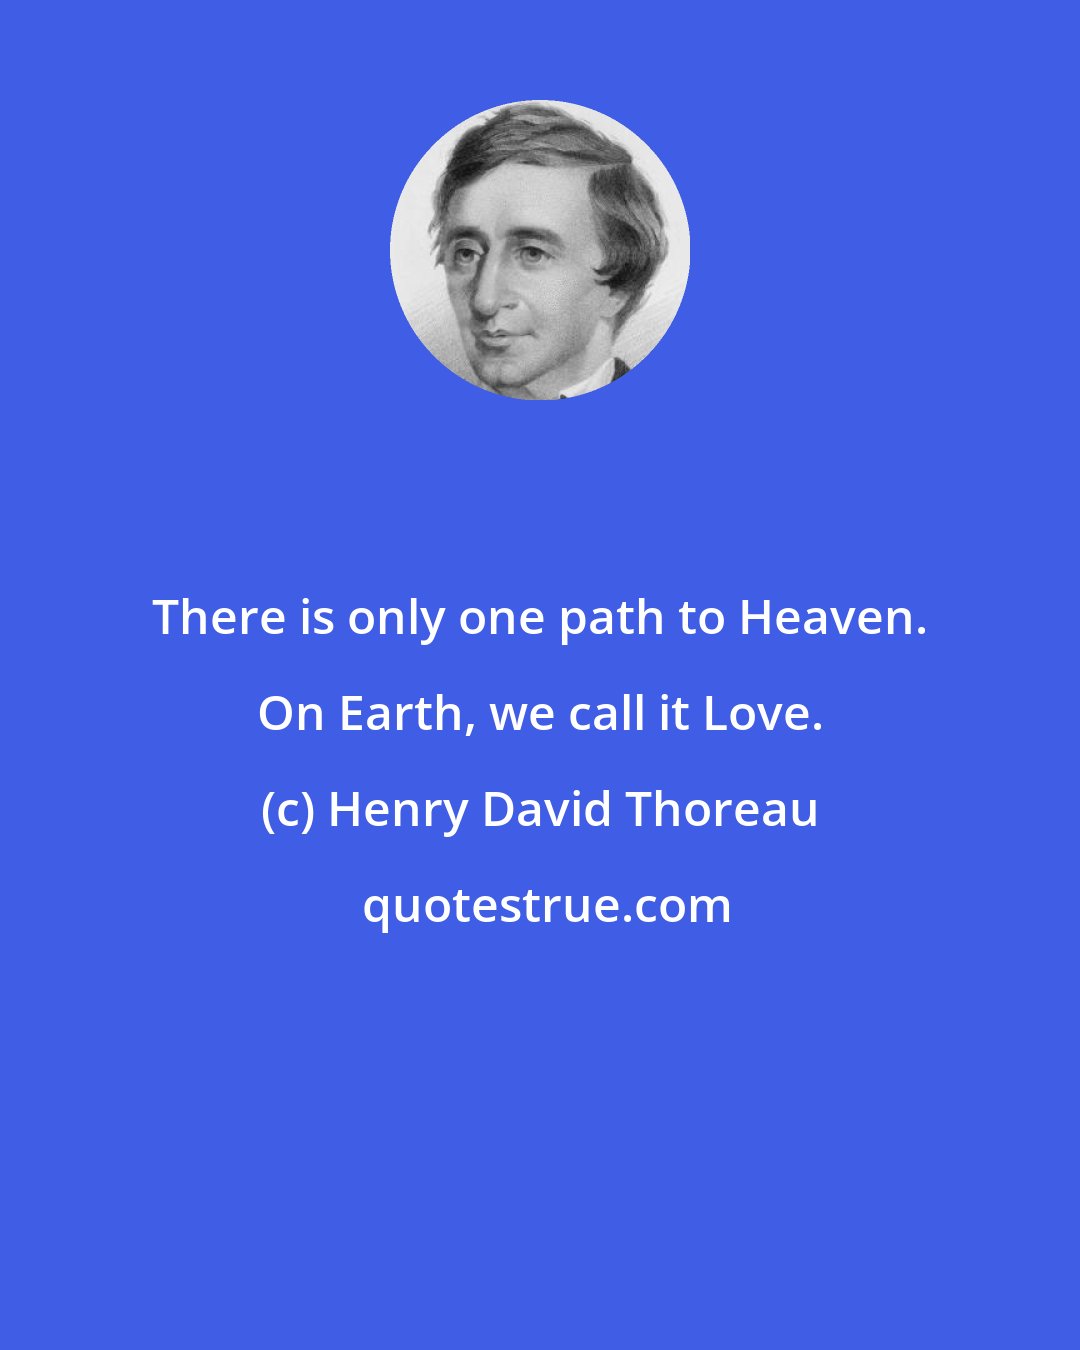 Henry David Thoreau: There is only one path to Heaven. On Earth, we call it Love.